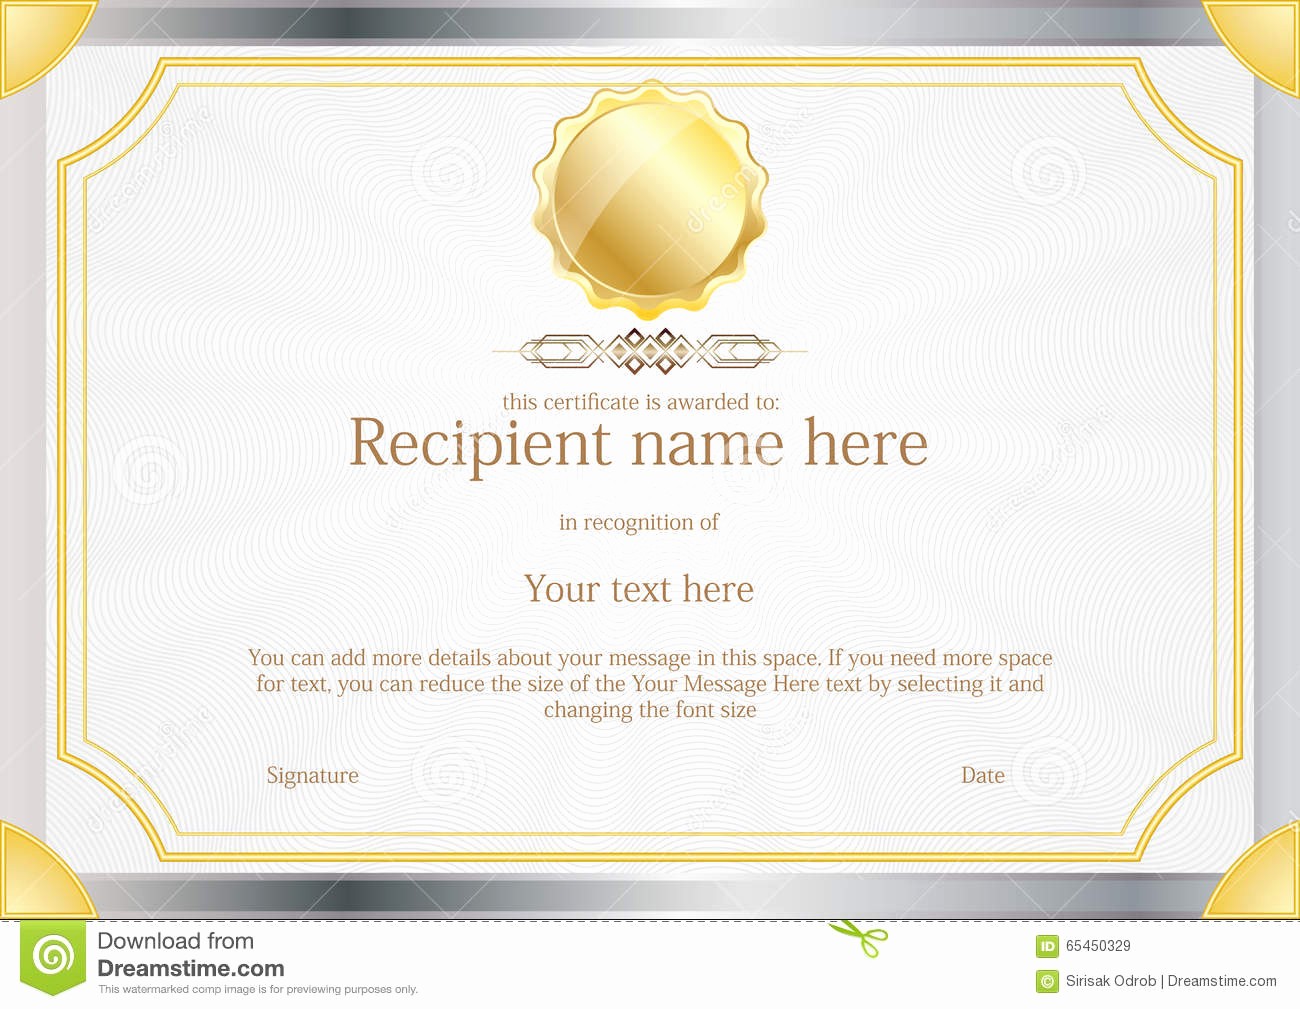 How to Design A Certificate New Award Certificate Frame Template Design Vector Stock